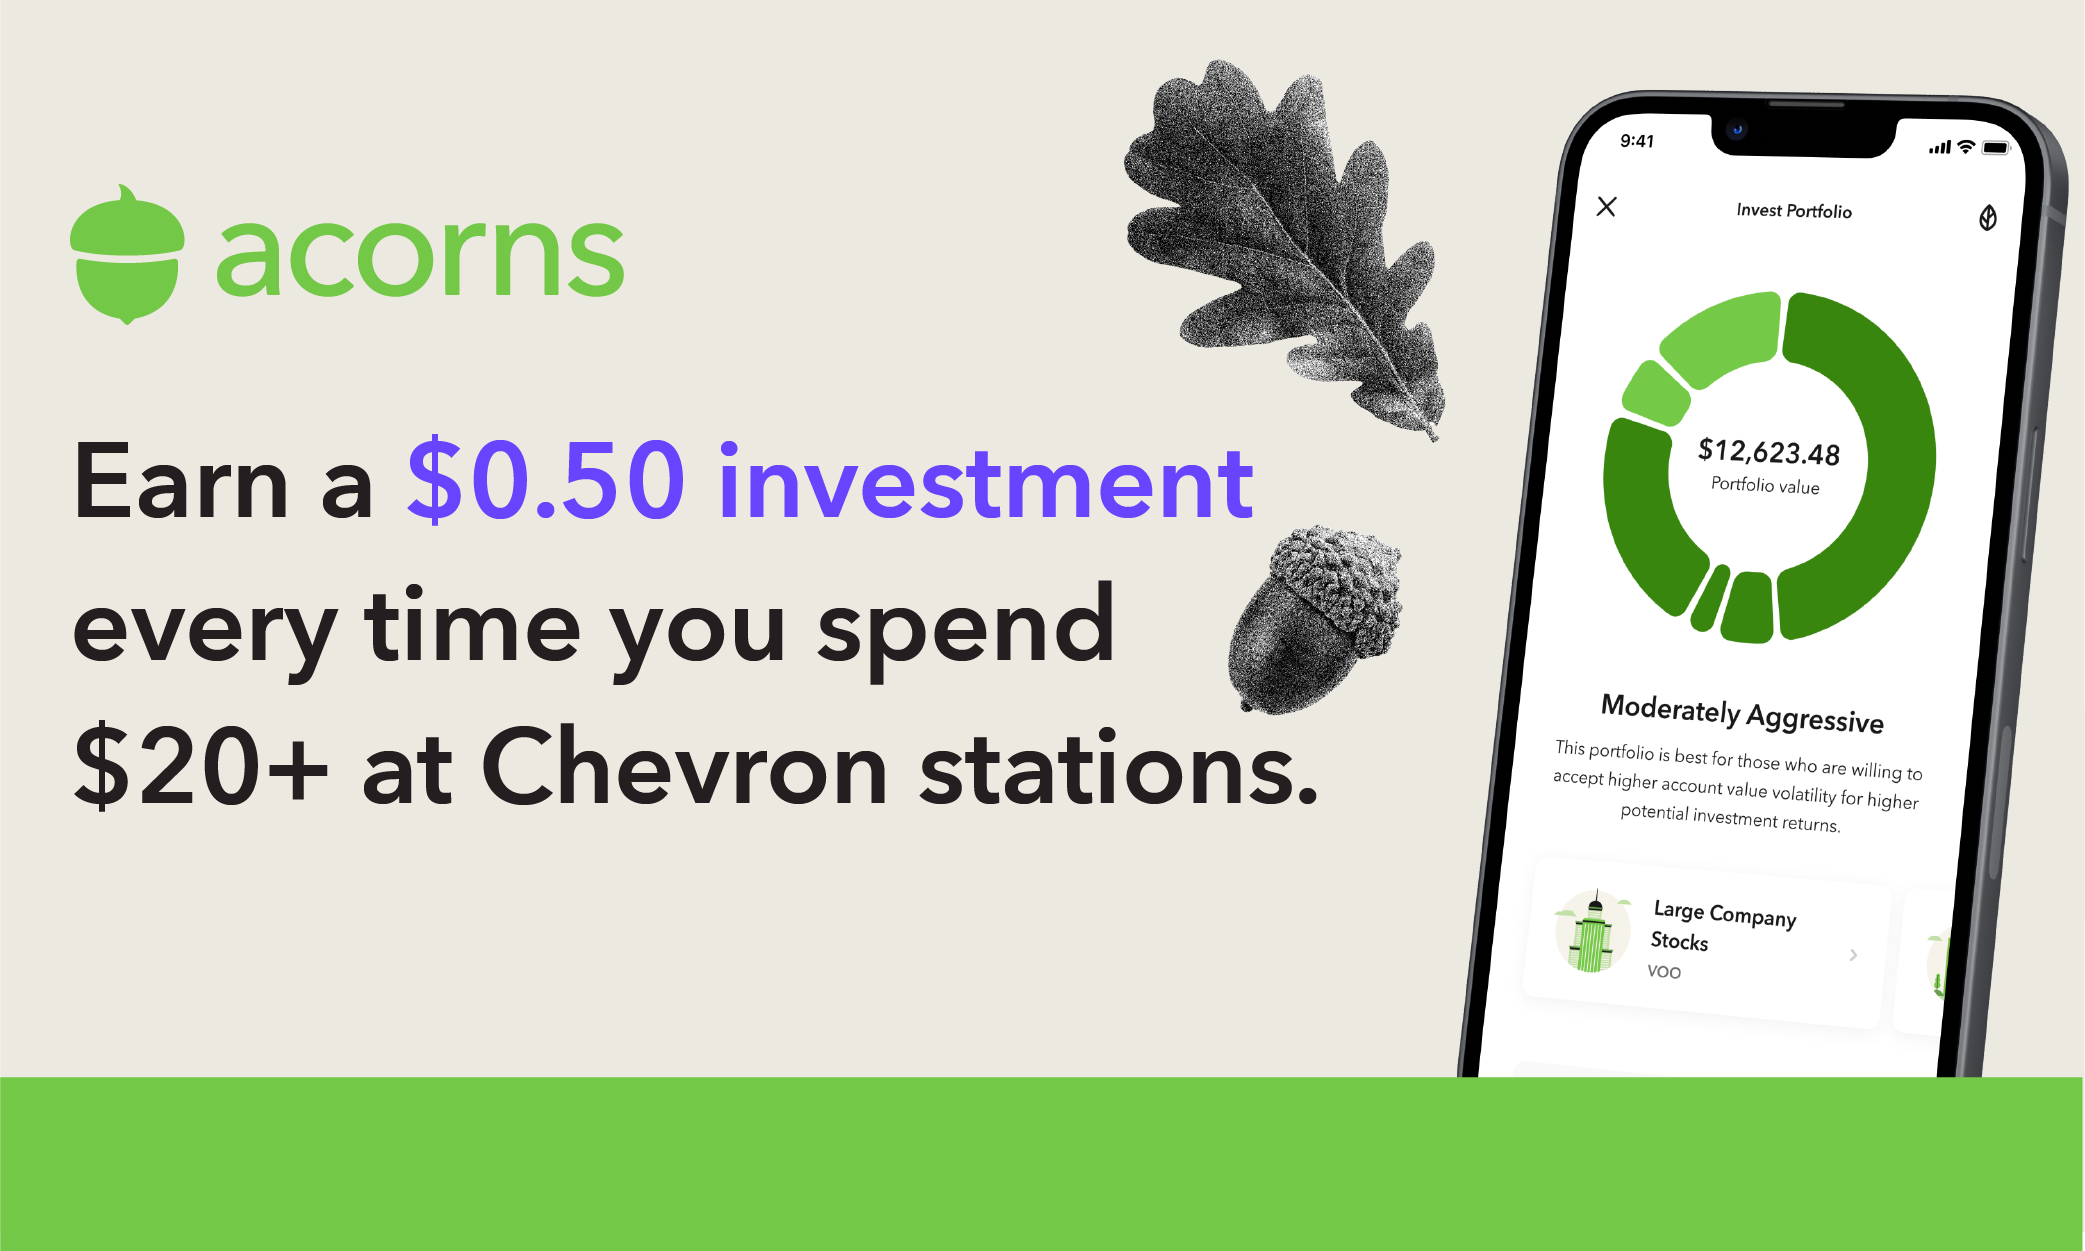 Join Acorns today and get a $20 bonus investment.